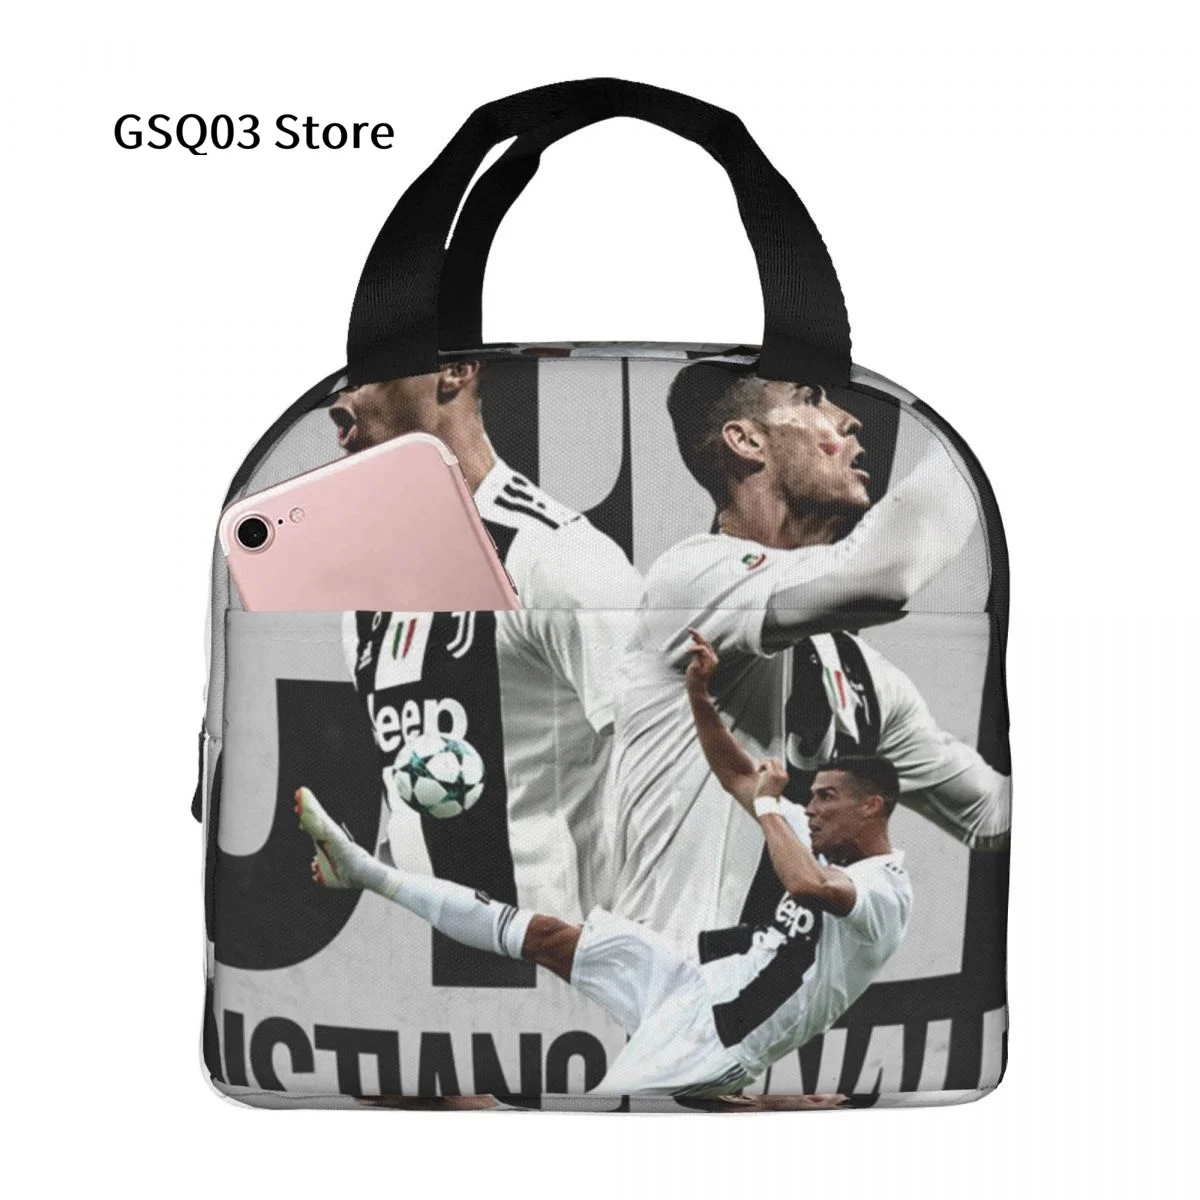 

C-Cr7 Ronaldo Lunch Box Reusable Tote Bag, Cooler Waterproof Lunch Bag Container For Work Office Travel Picnic